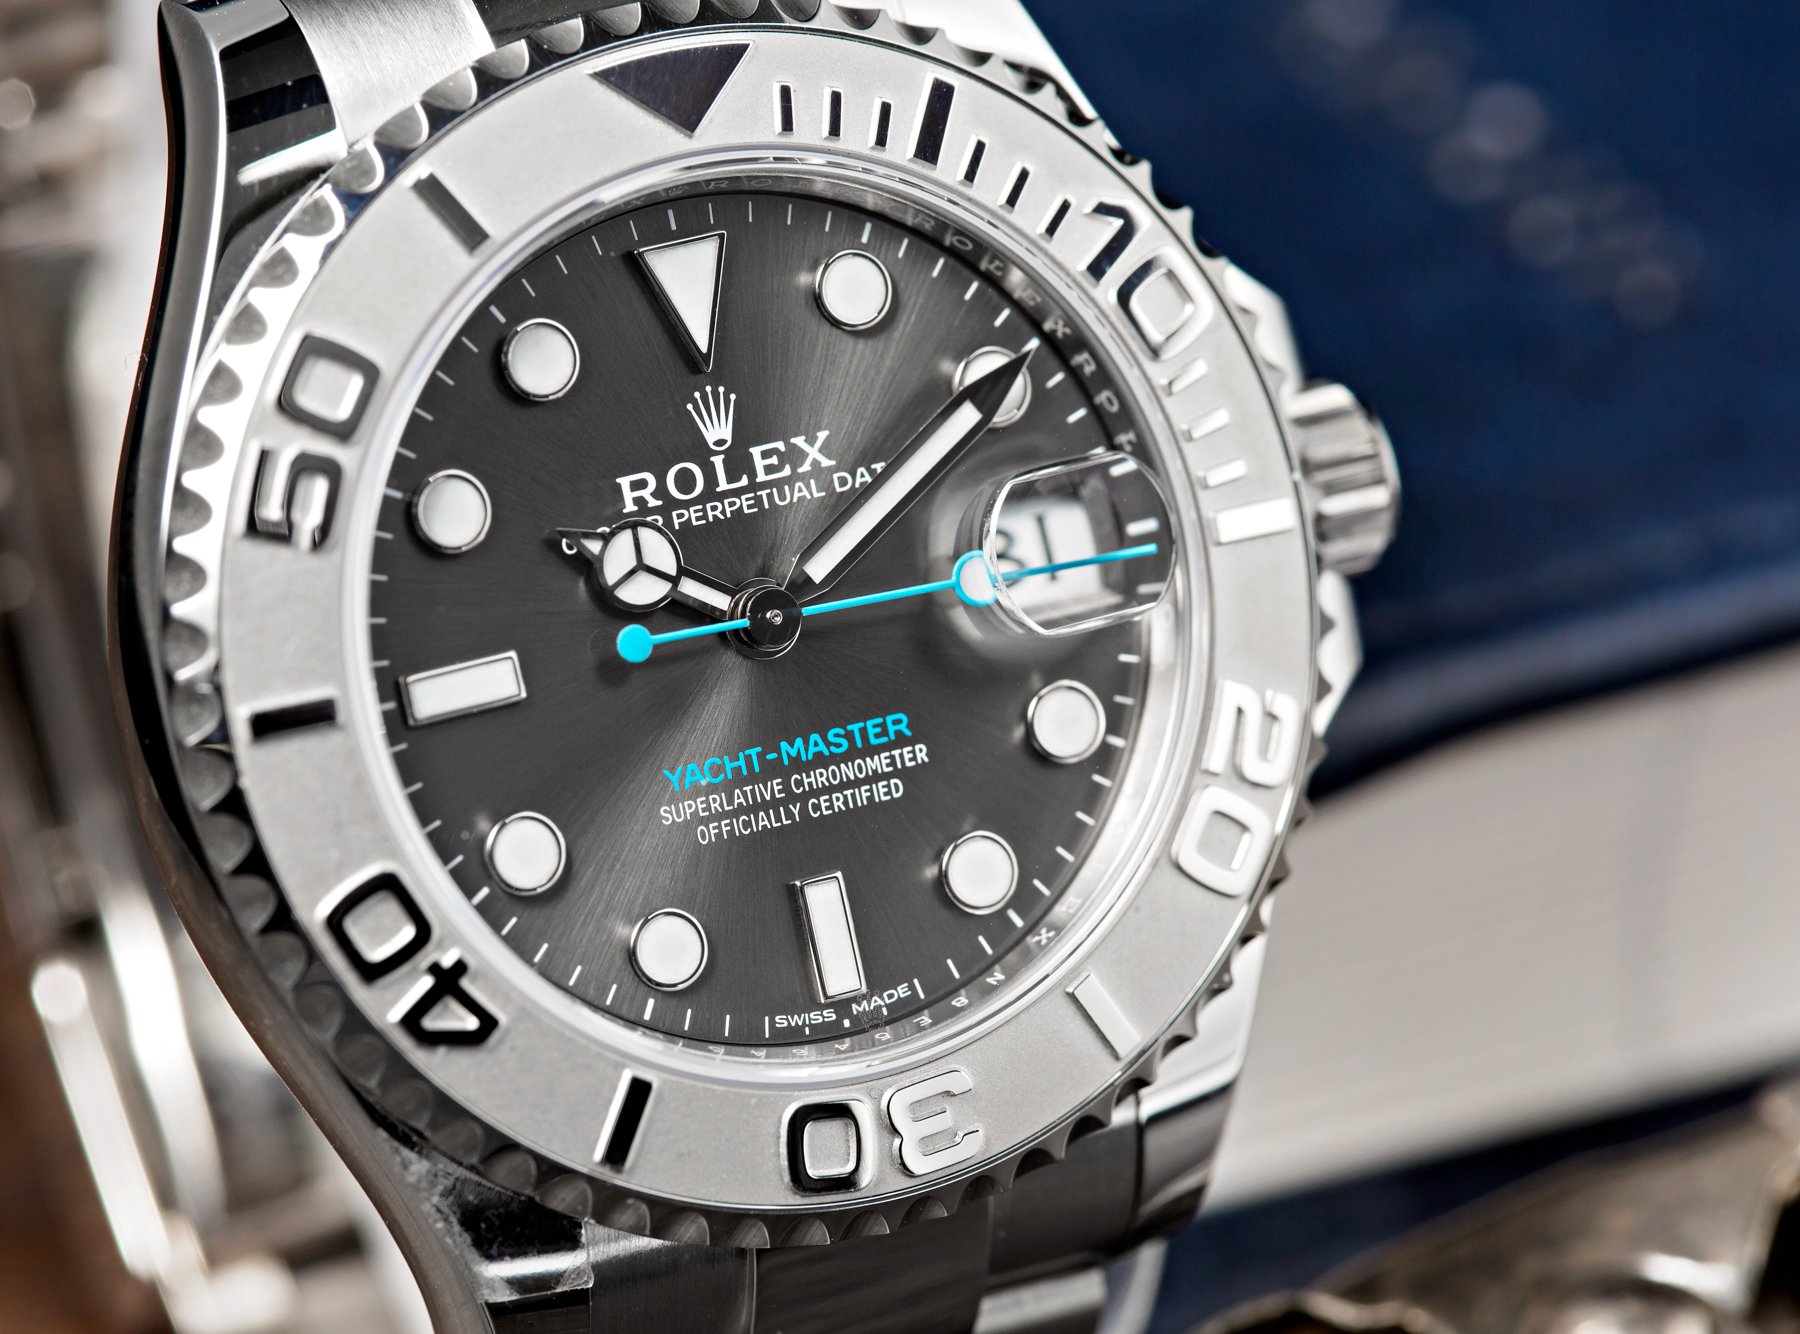 The Yacht-Master 37 has a very interesting dial.